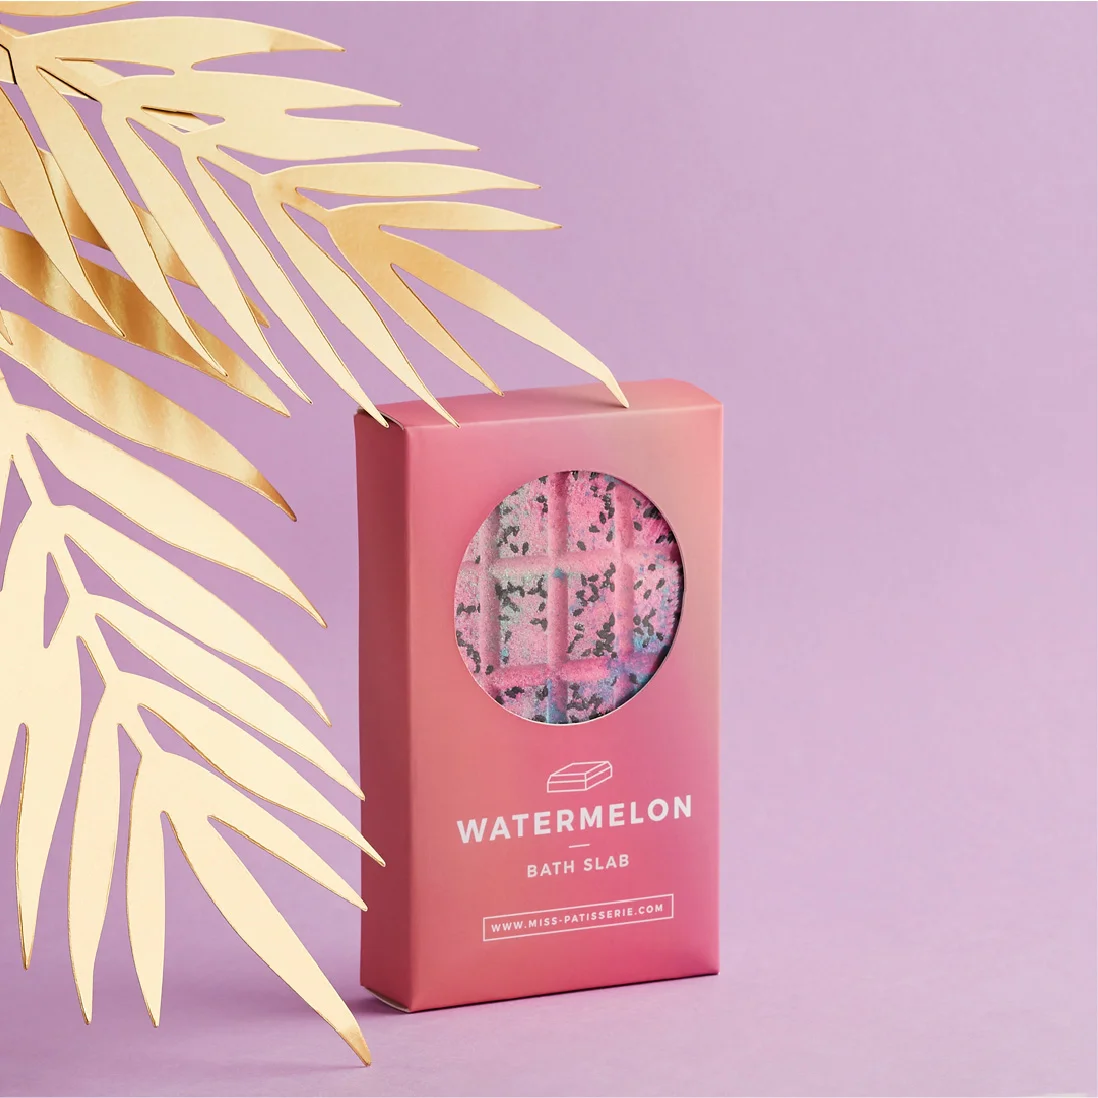 A pink watermelon-scented bath slab box with a transparent window showing the product inside, designed by a top Design Agency Bristol, set against a pink background with a decorative metallic gold palm leaf.